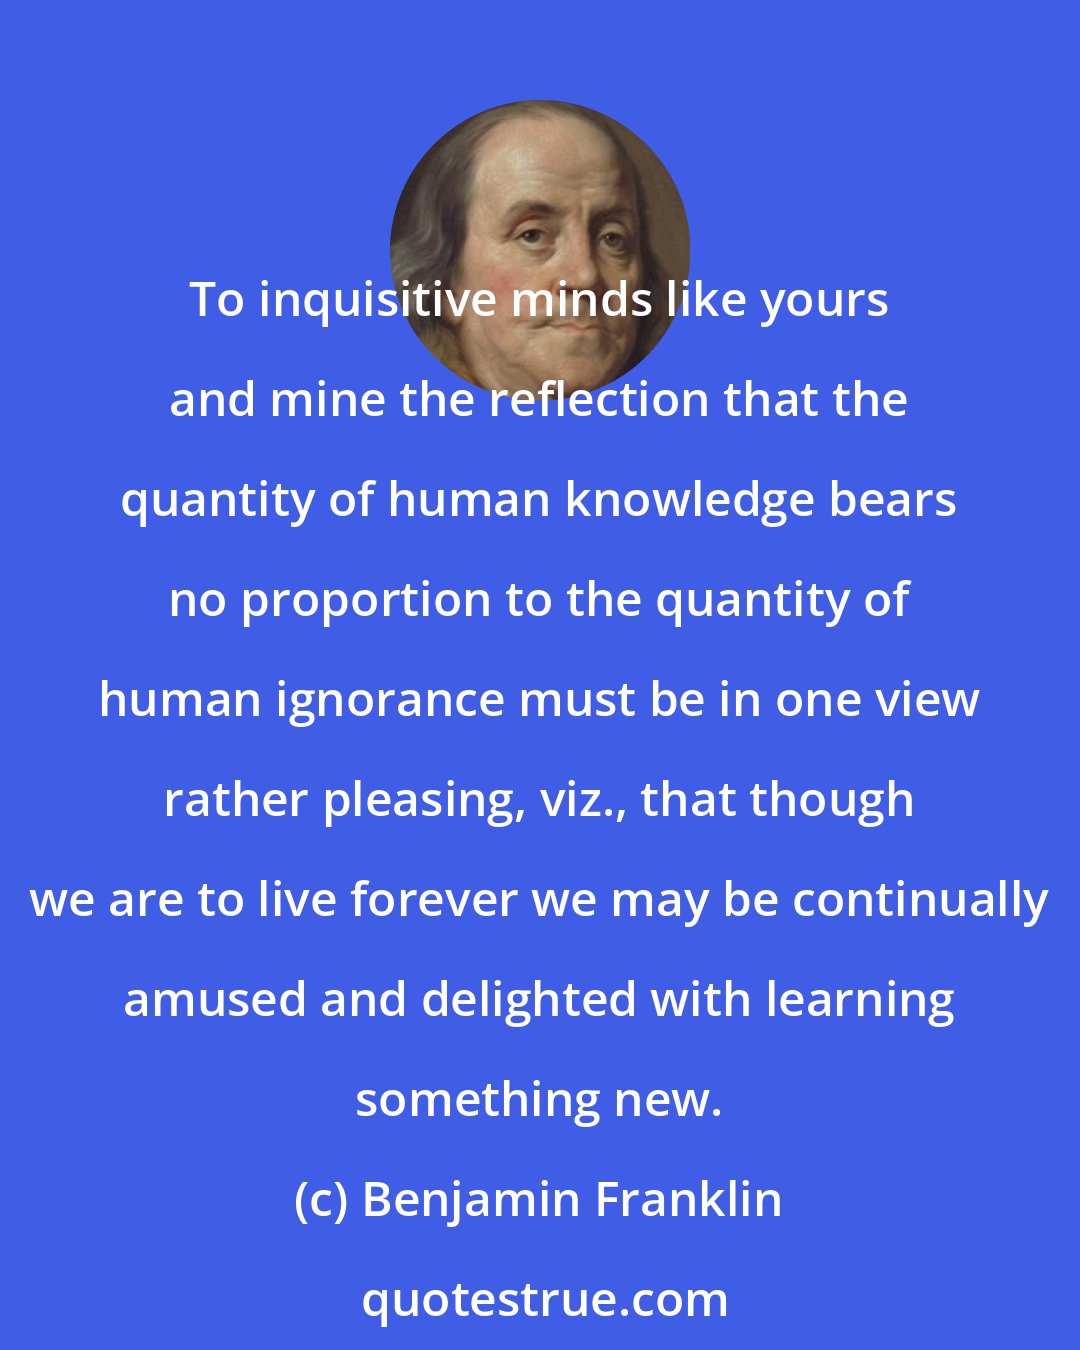 Benjamin Franklin: To inquisitive minds like yours and mine the reflection that the quantity of human knowledge bears no proportion to the quantity of human ignorance must be in one view rather pleasing, viz., that though we are to live forever we may be continually amused and delighted with learning something new.